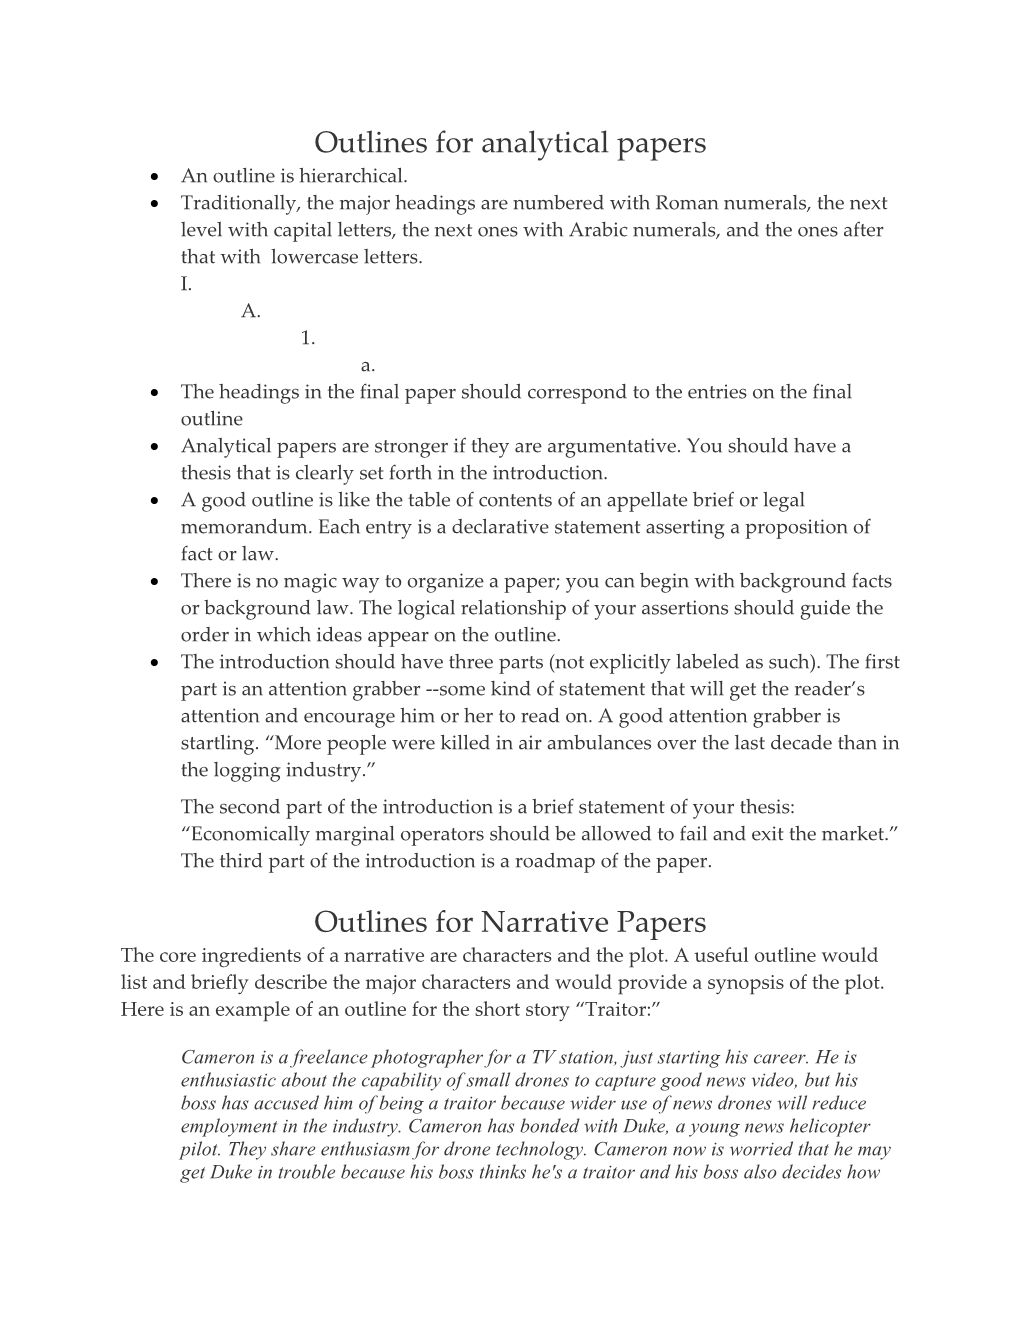 Outlines for Analytical Papers